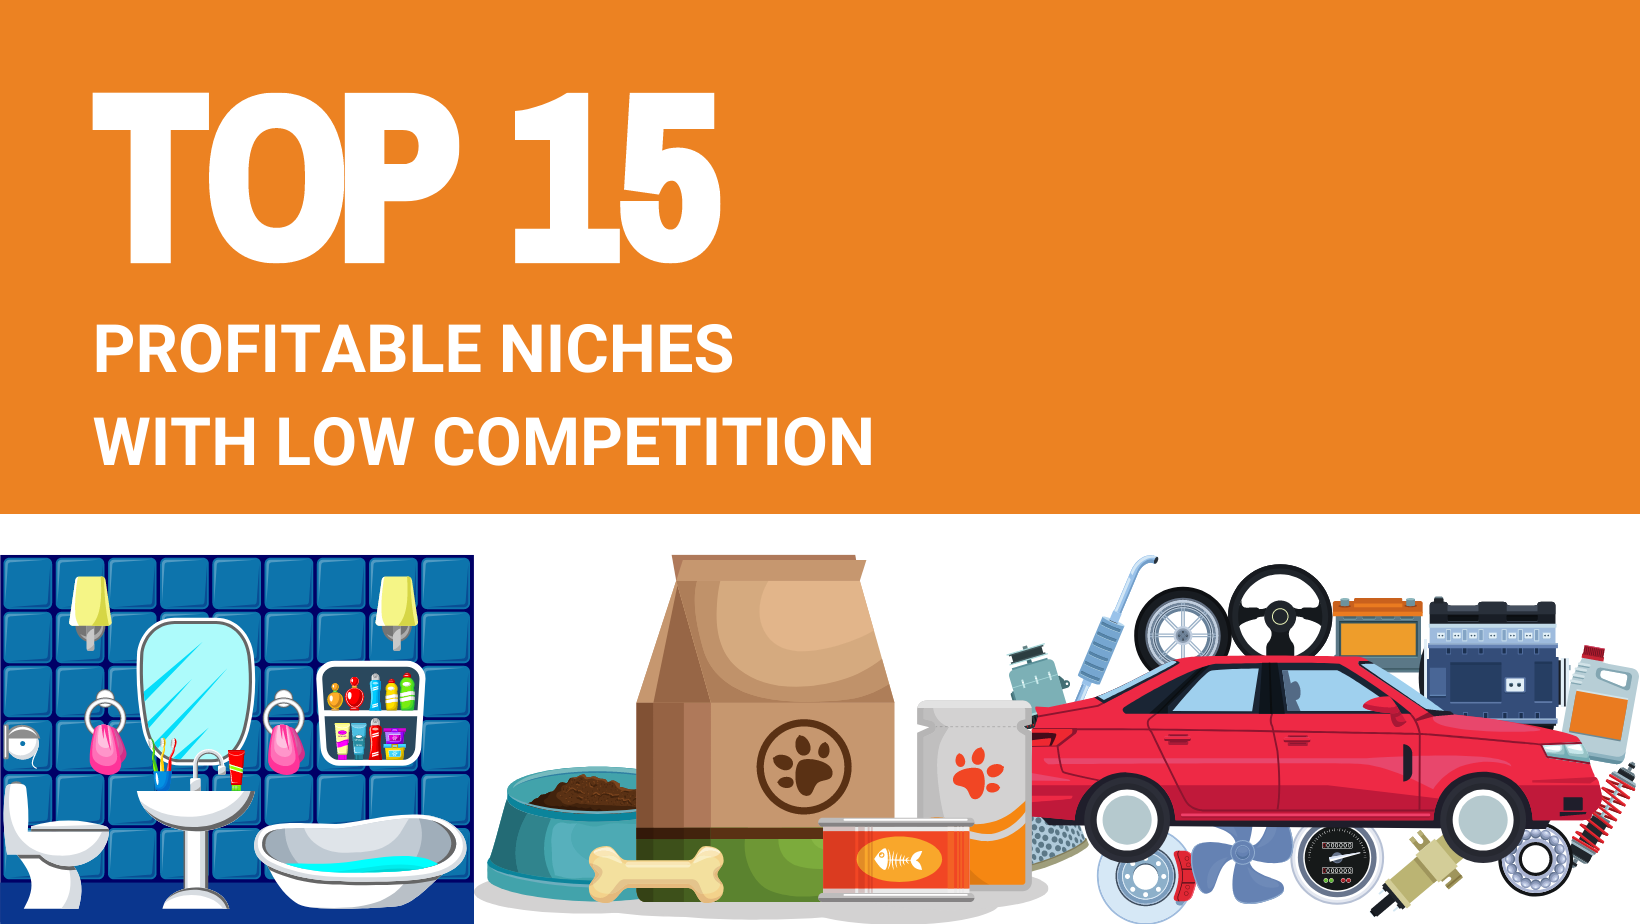 TOP 15 PROFITABLE NICHES WITH LOW COMPETITION